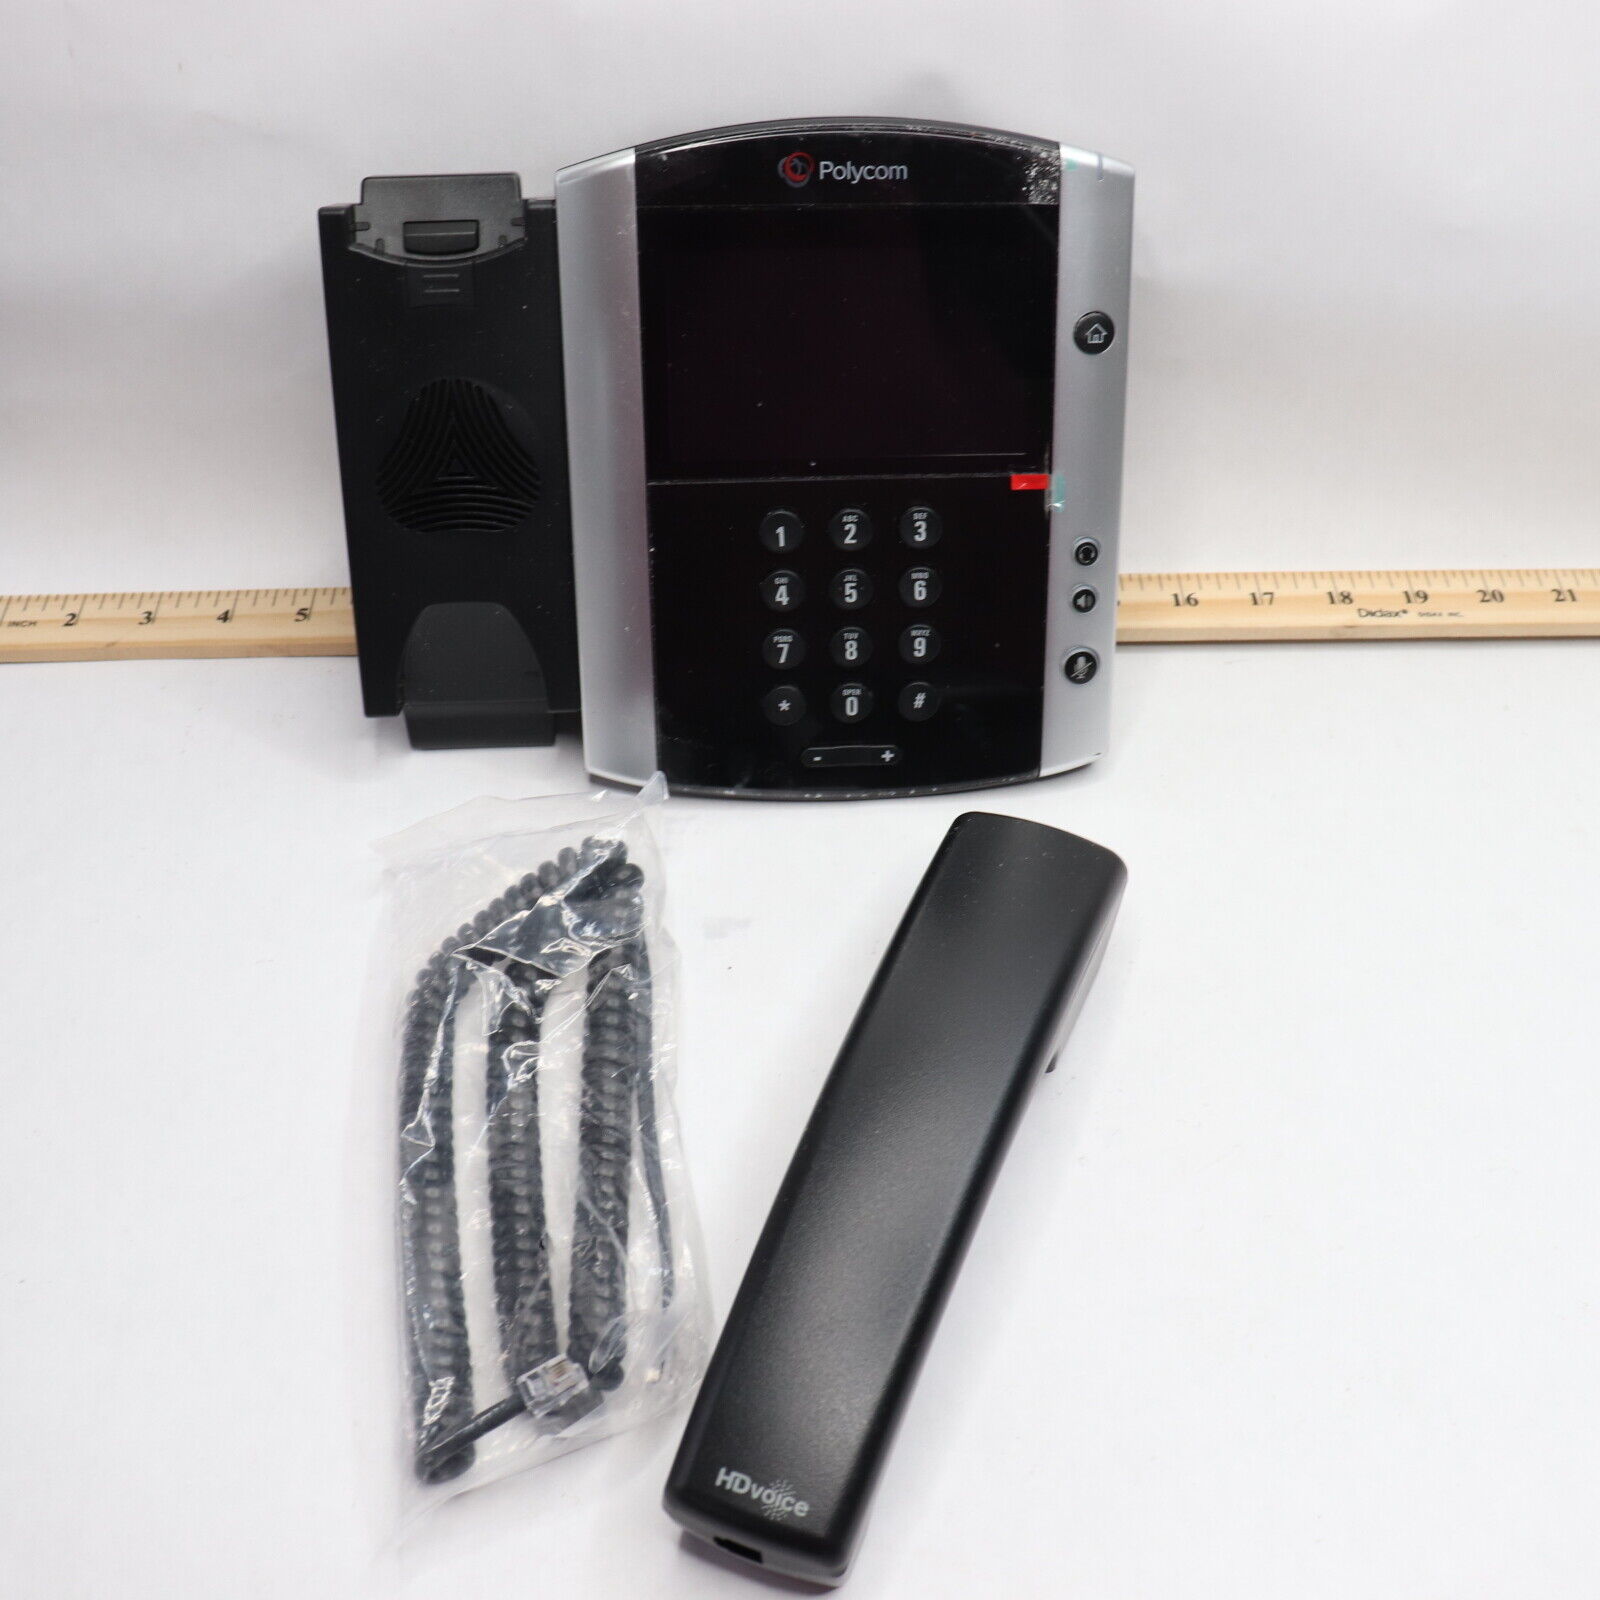 Polycom VoIP Phone 3-Way Call Capability 16-Lines - Base is Missing Stand